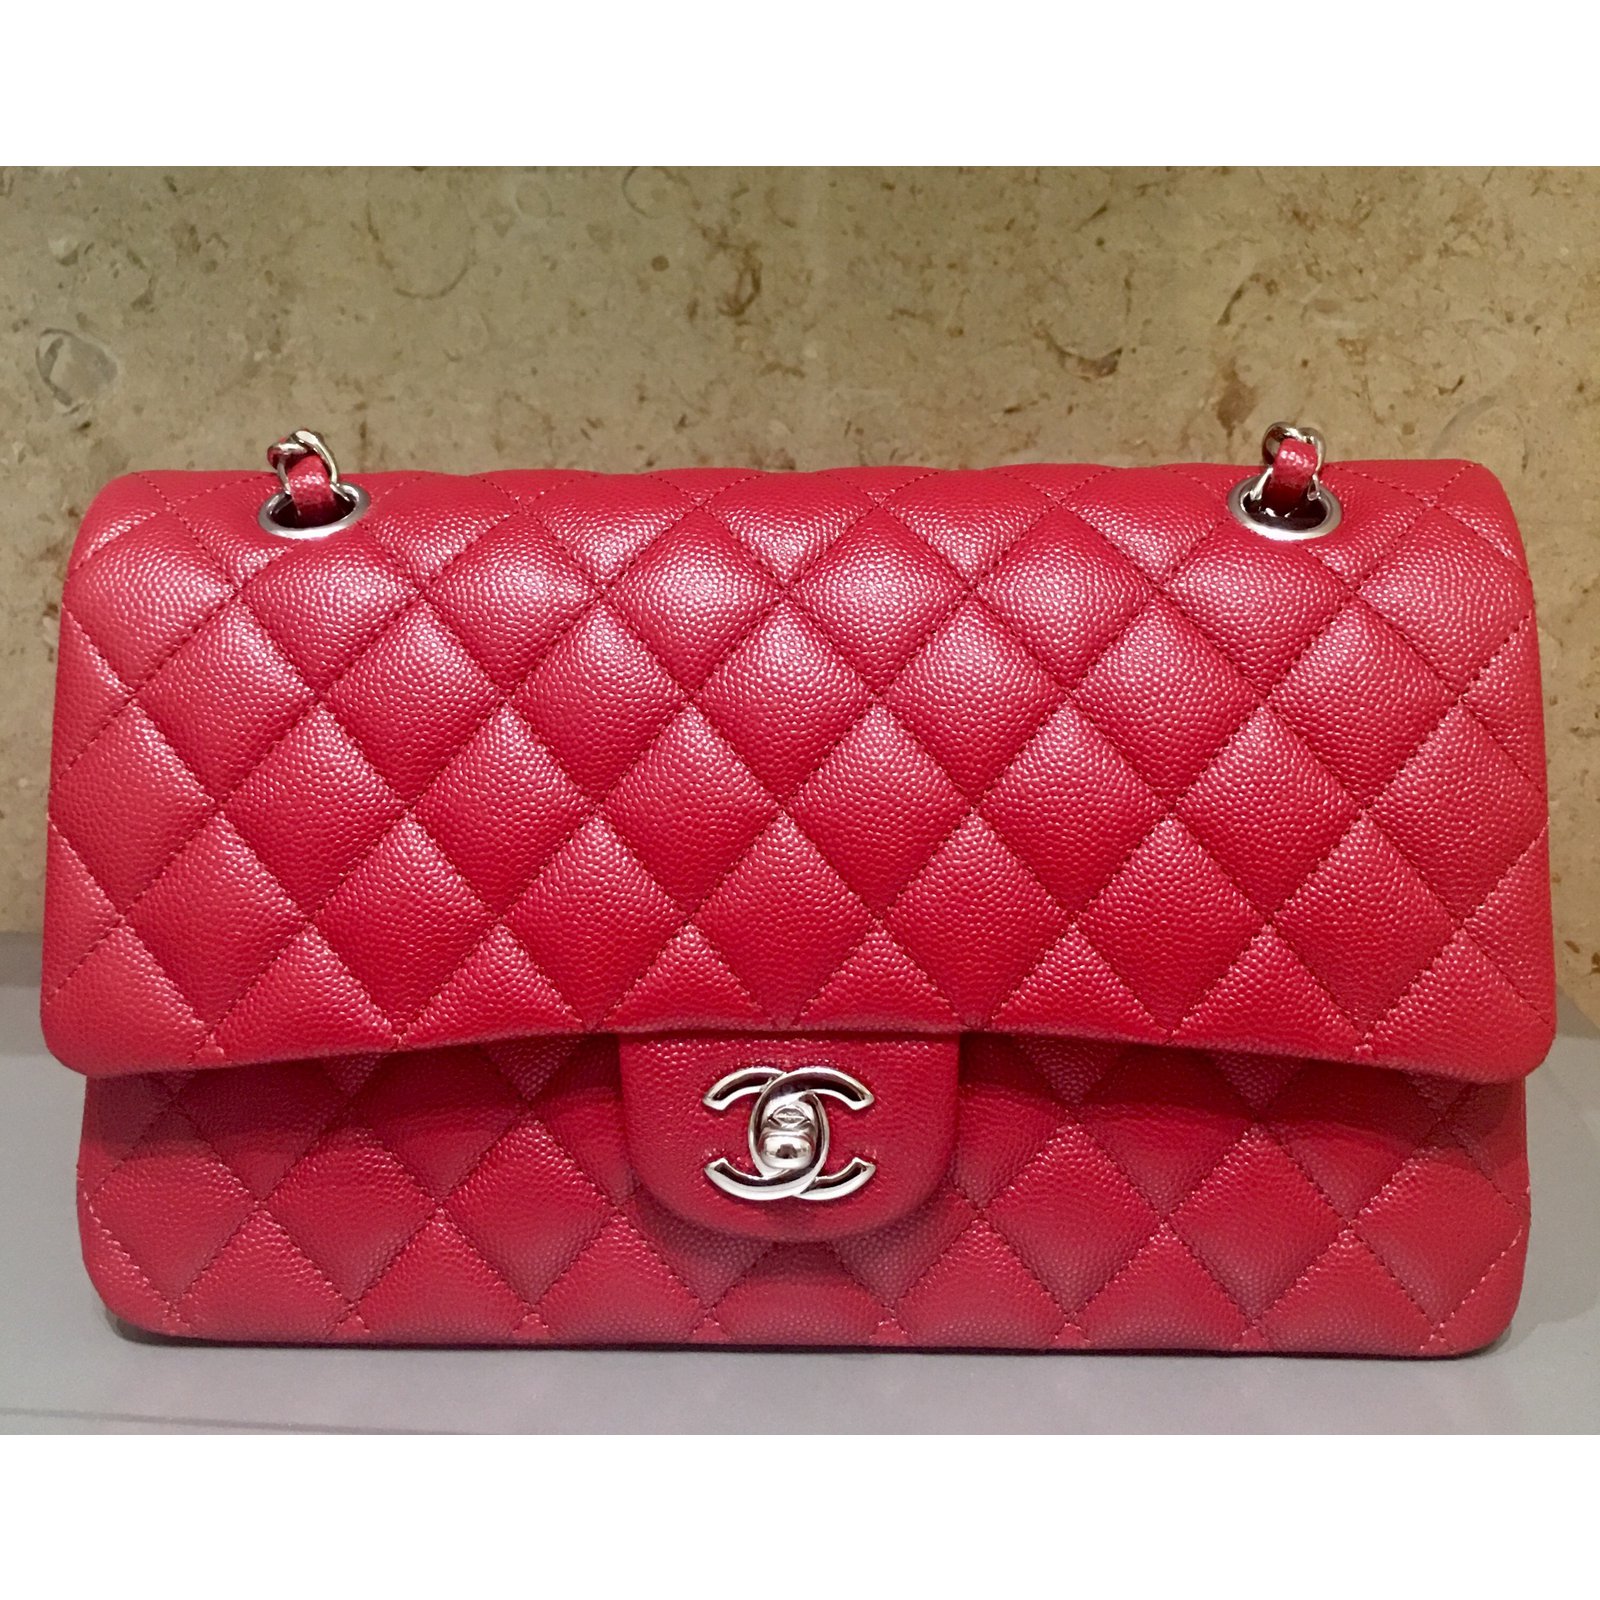 Chanel Timeless Red Leather ref.54311